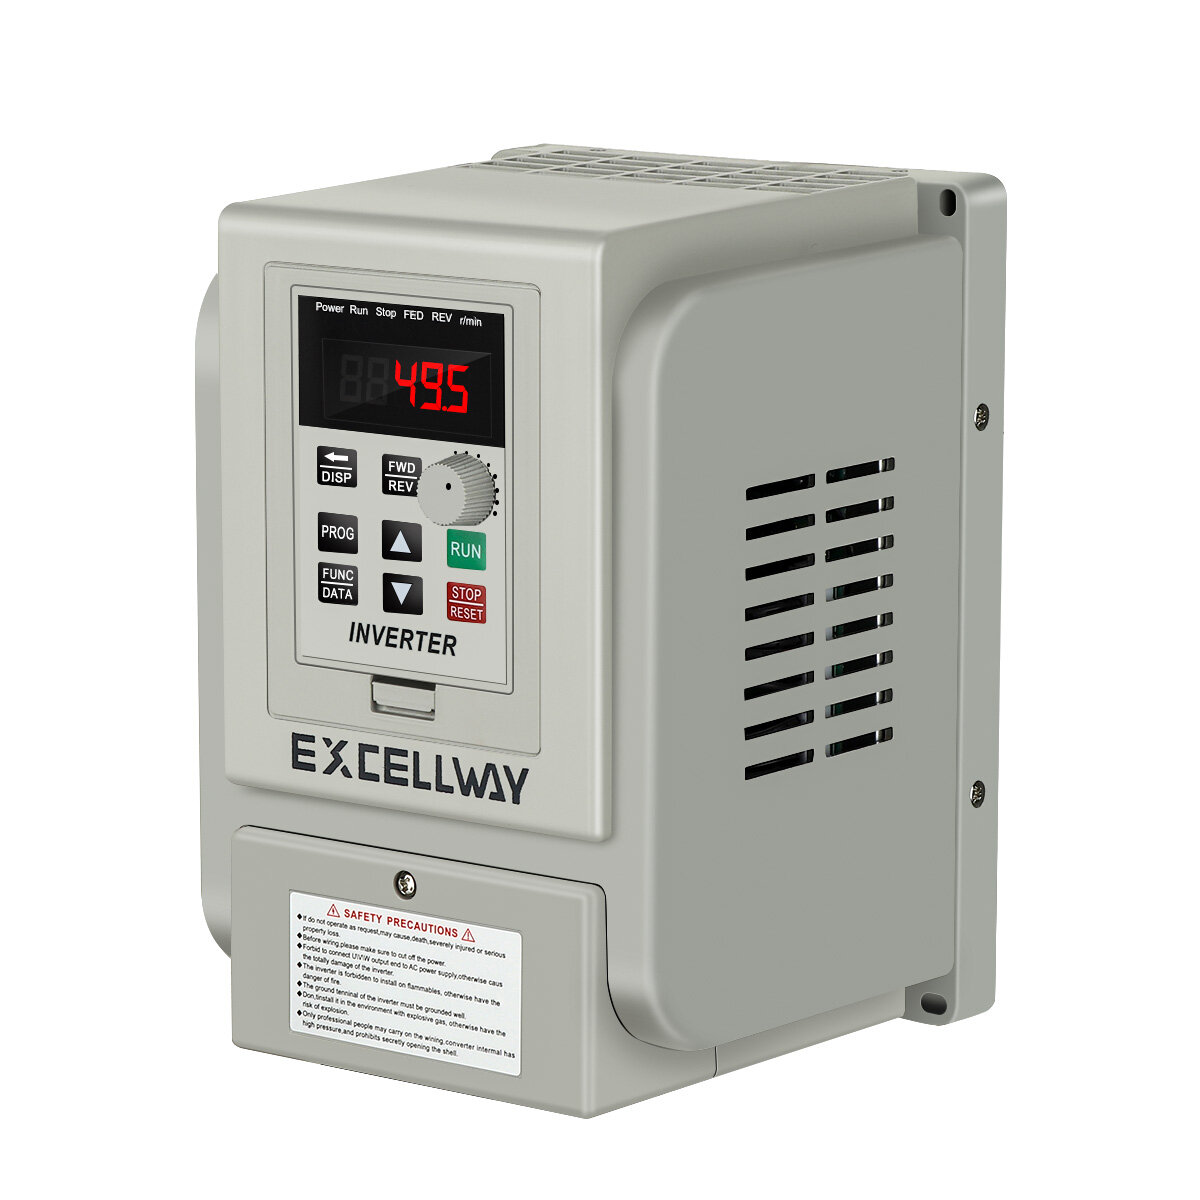 best price,excellway,3kw,220v,pwm,control,inverter,1phase,input,3phase,out,eu,coupon,price,discount